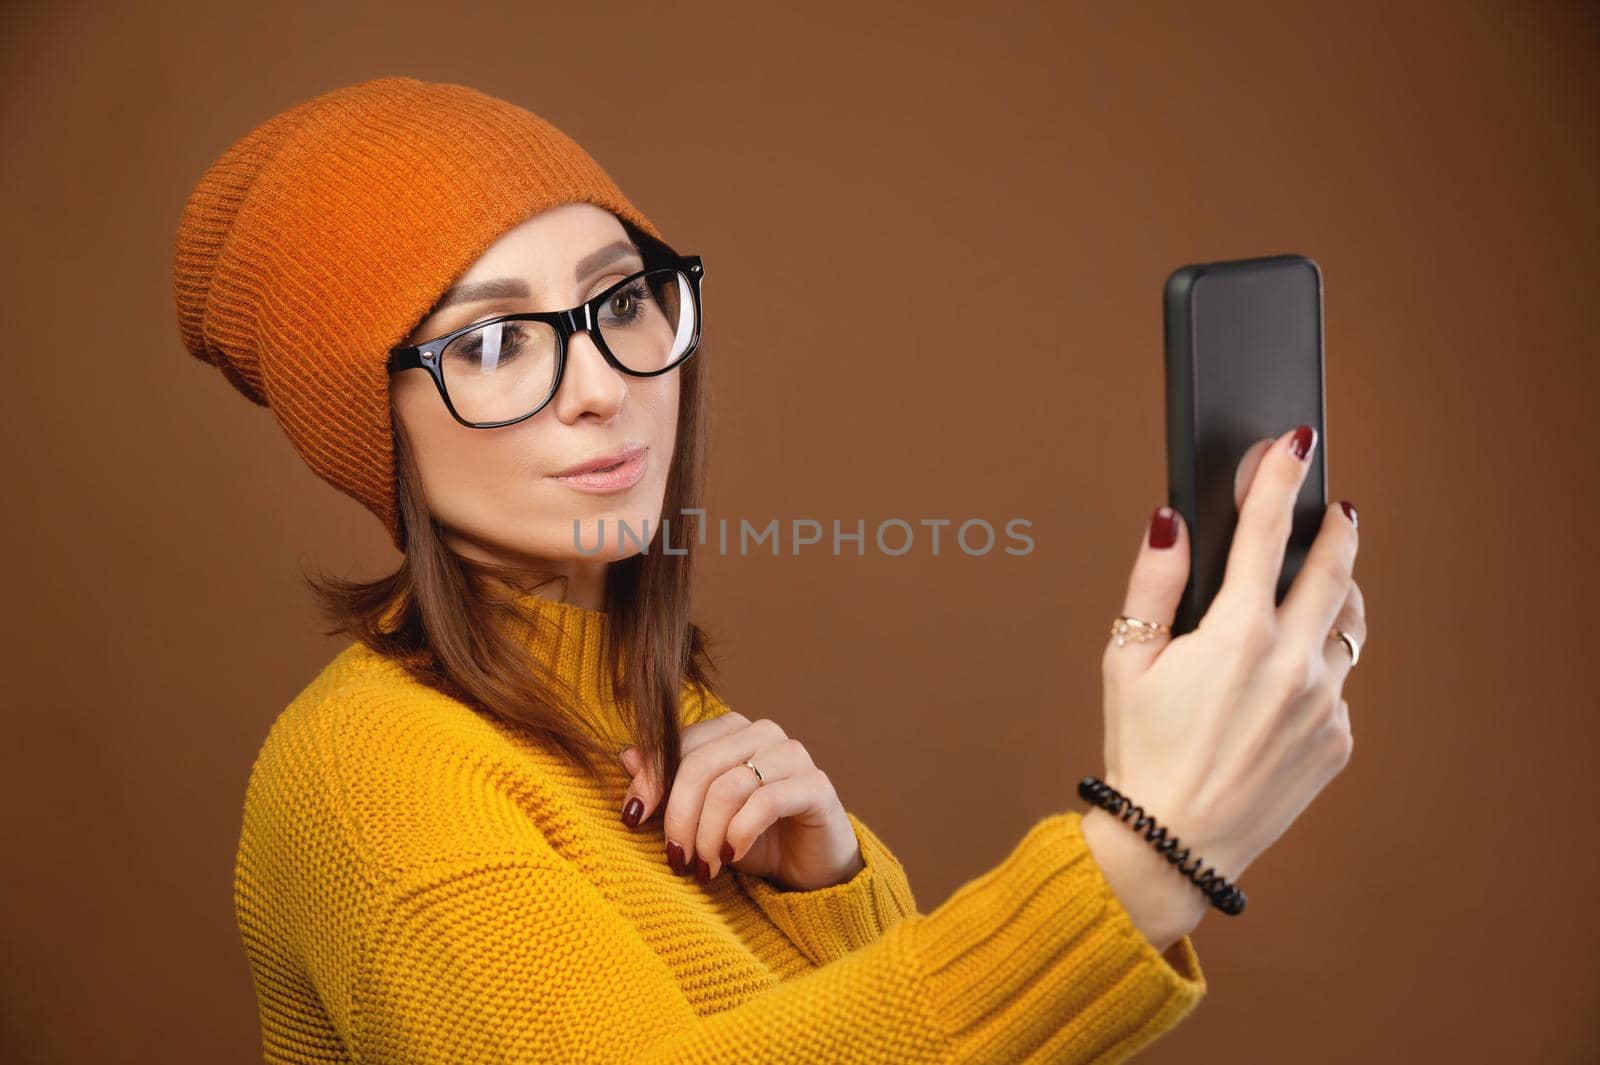 Beautiful young caucasian woman with flowing hair wearing glasses sweater and hat taking a selfie with your smartphone. Studio portrait on a brown background. Copy space.